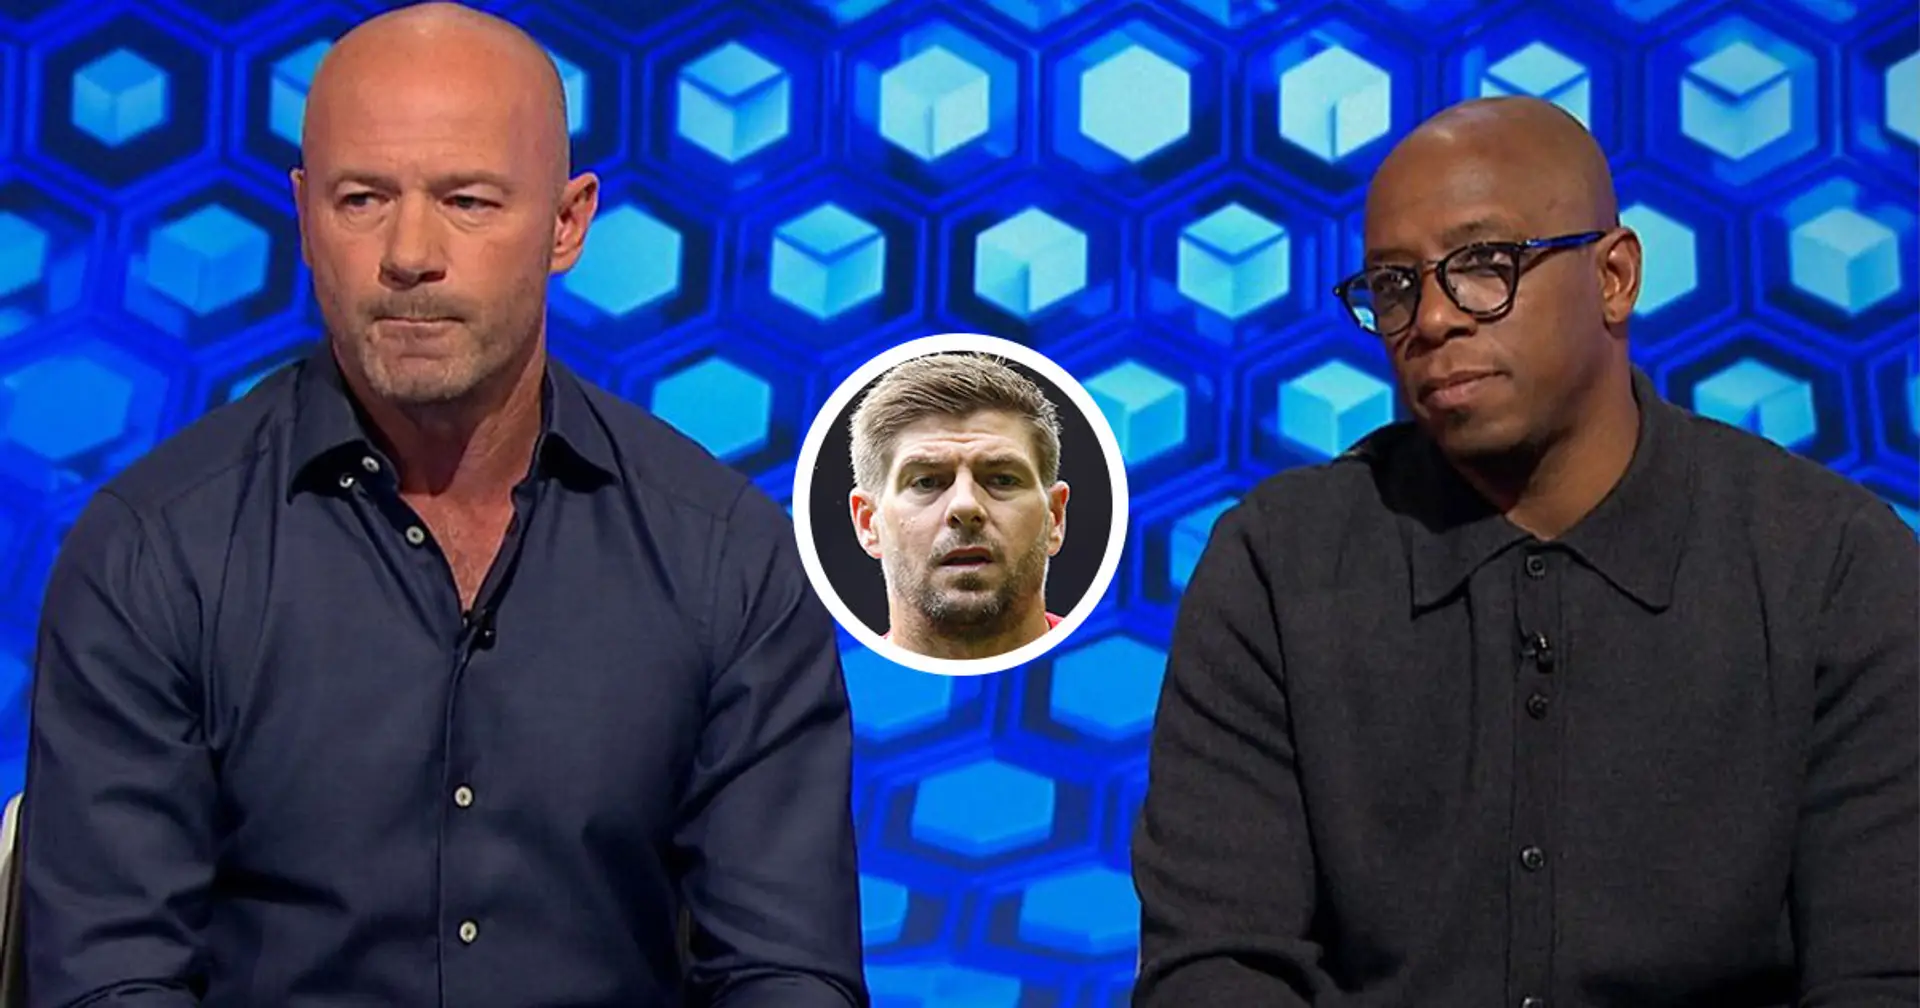 'What's he drinking?': Alan Shearer slams Ian Wright for ranking Stevie G ridiculously low among PL captains